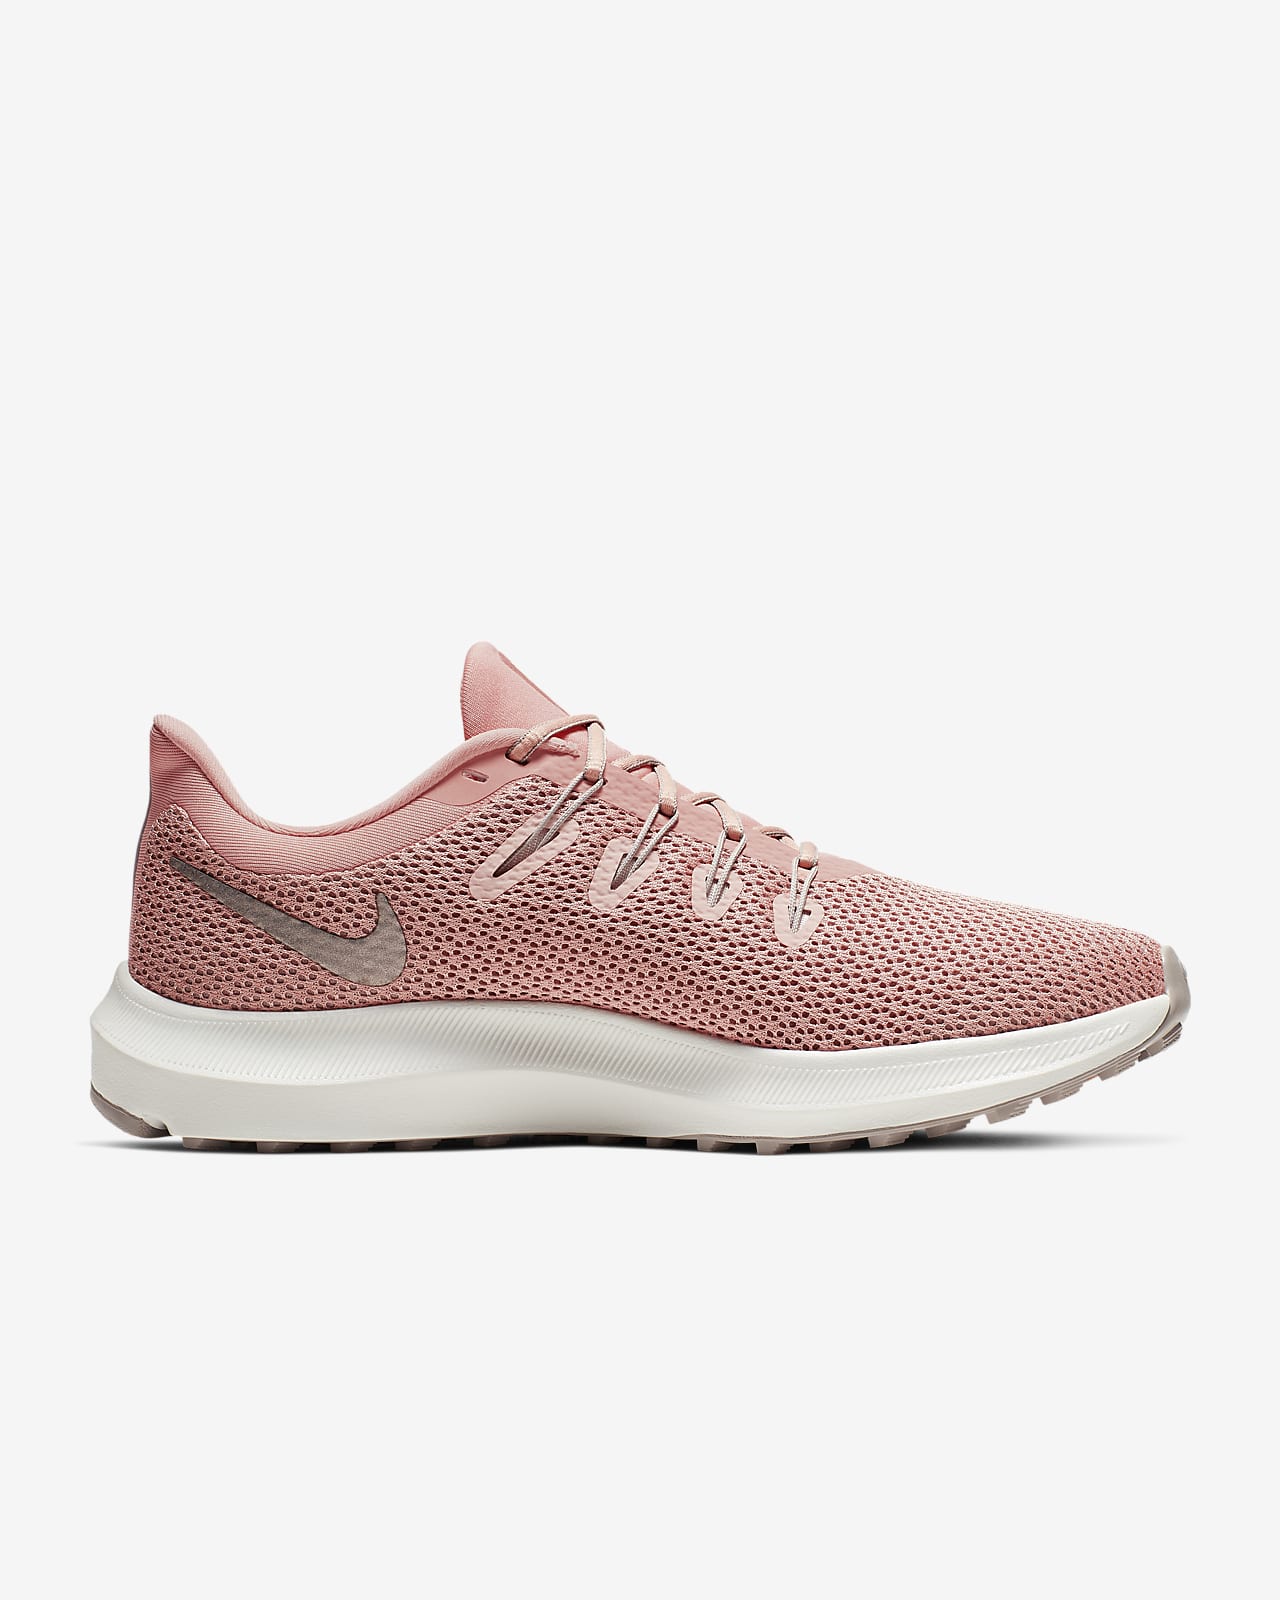 nike quest mujer opiniones